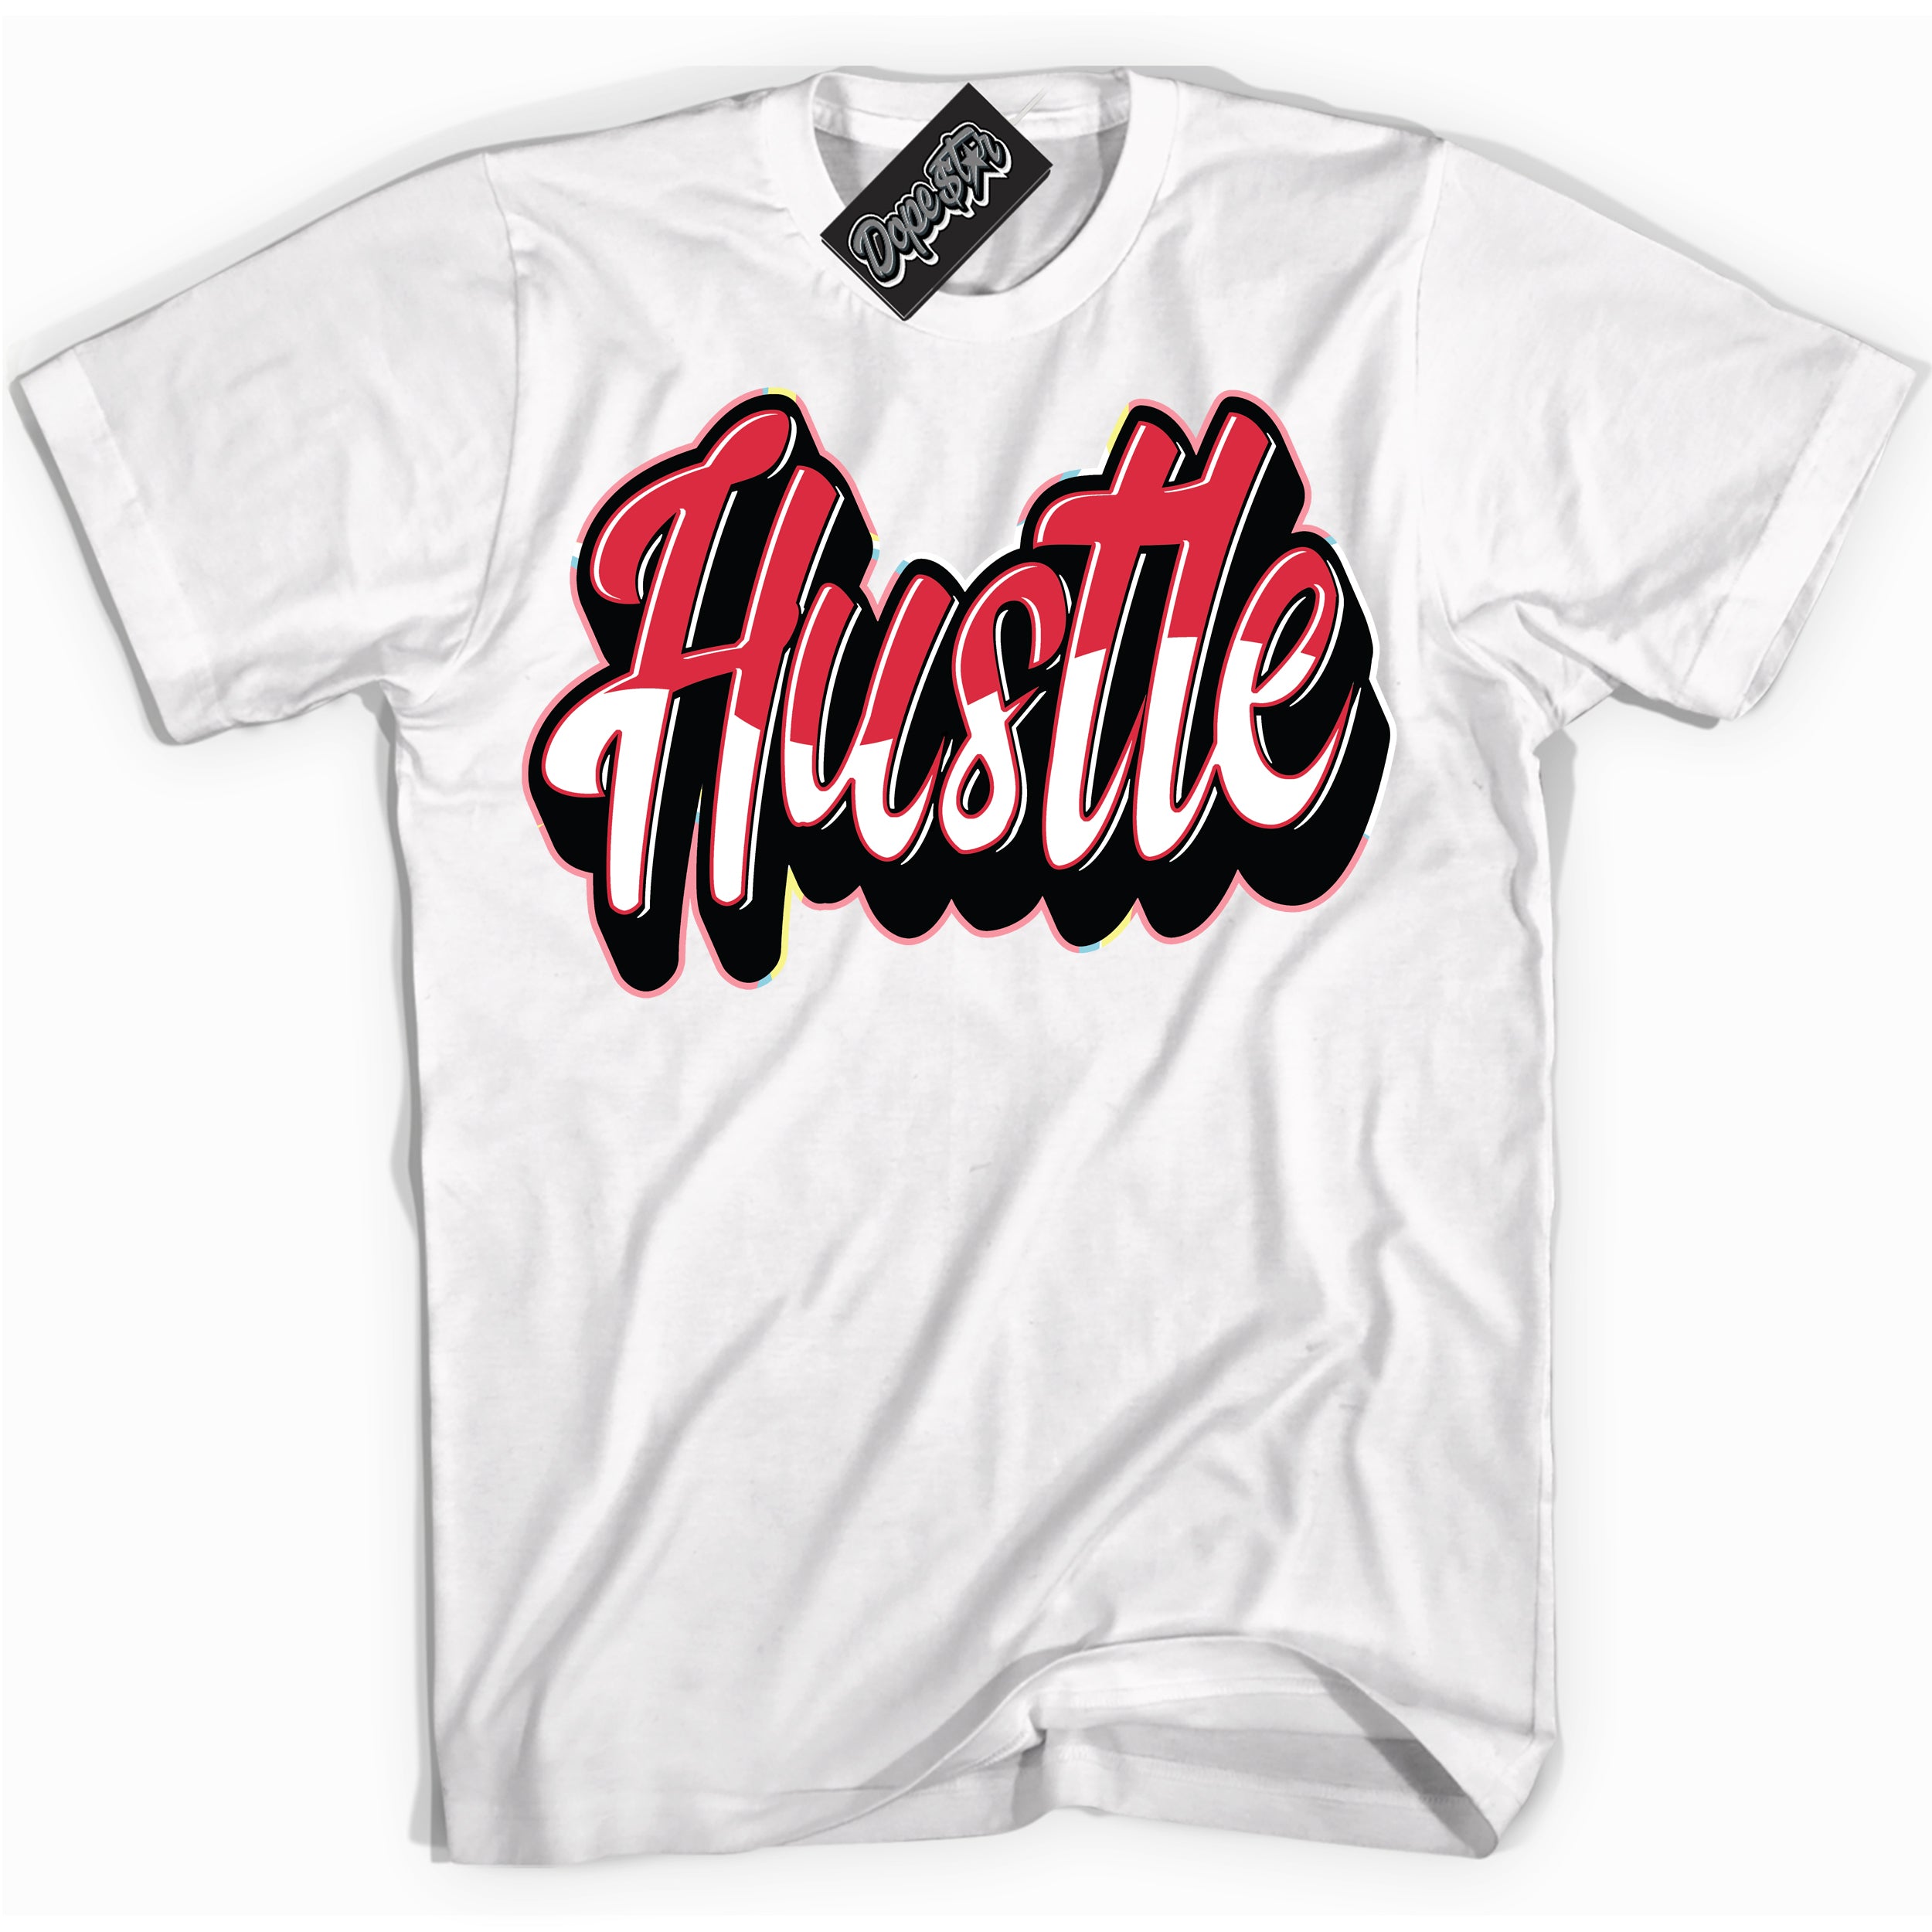 Cool White graphic tee with “ Hustle ” design, that perfectly matches Spider-Verse 1s sneakers 